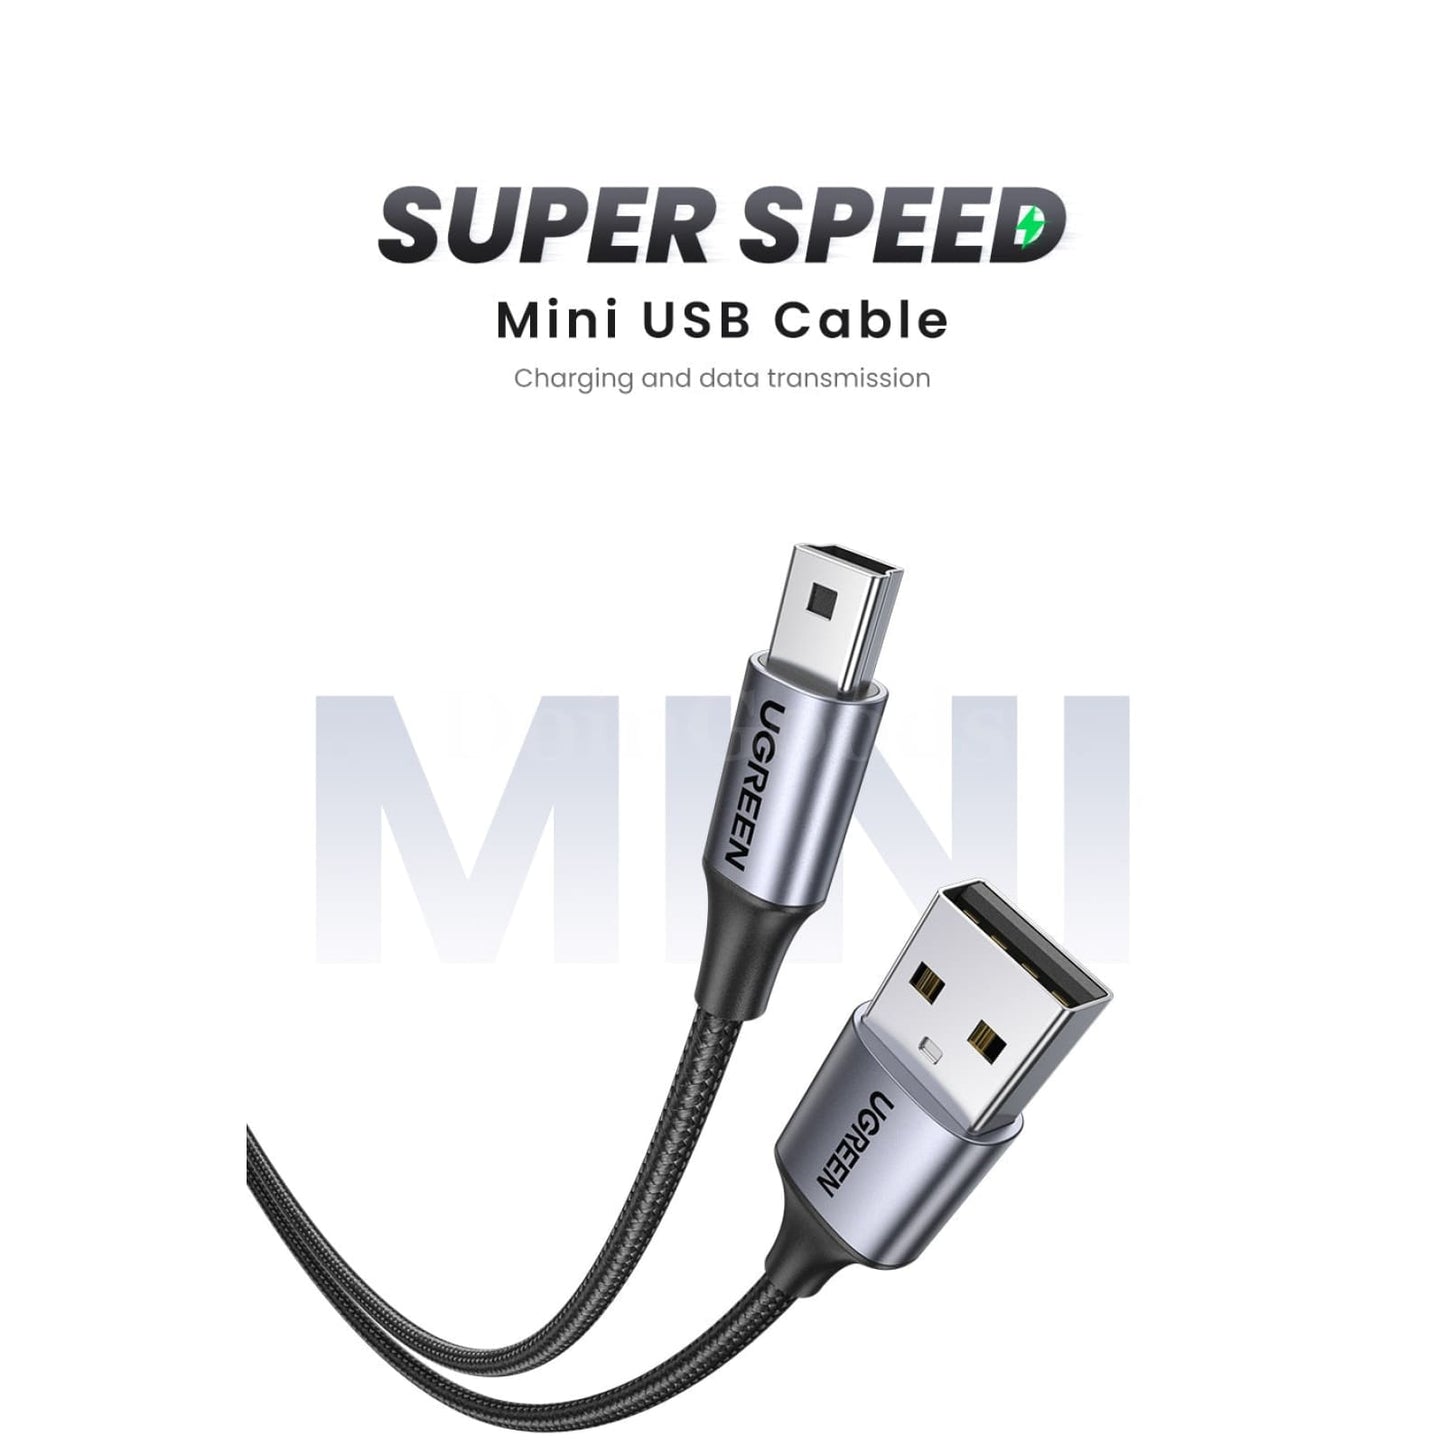 Ugreen Mini Usb Cable - Fast Data Charger For Mp3 Mp4 Player Car Dvr Gps 301635